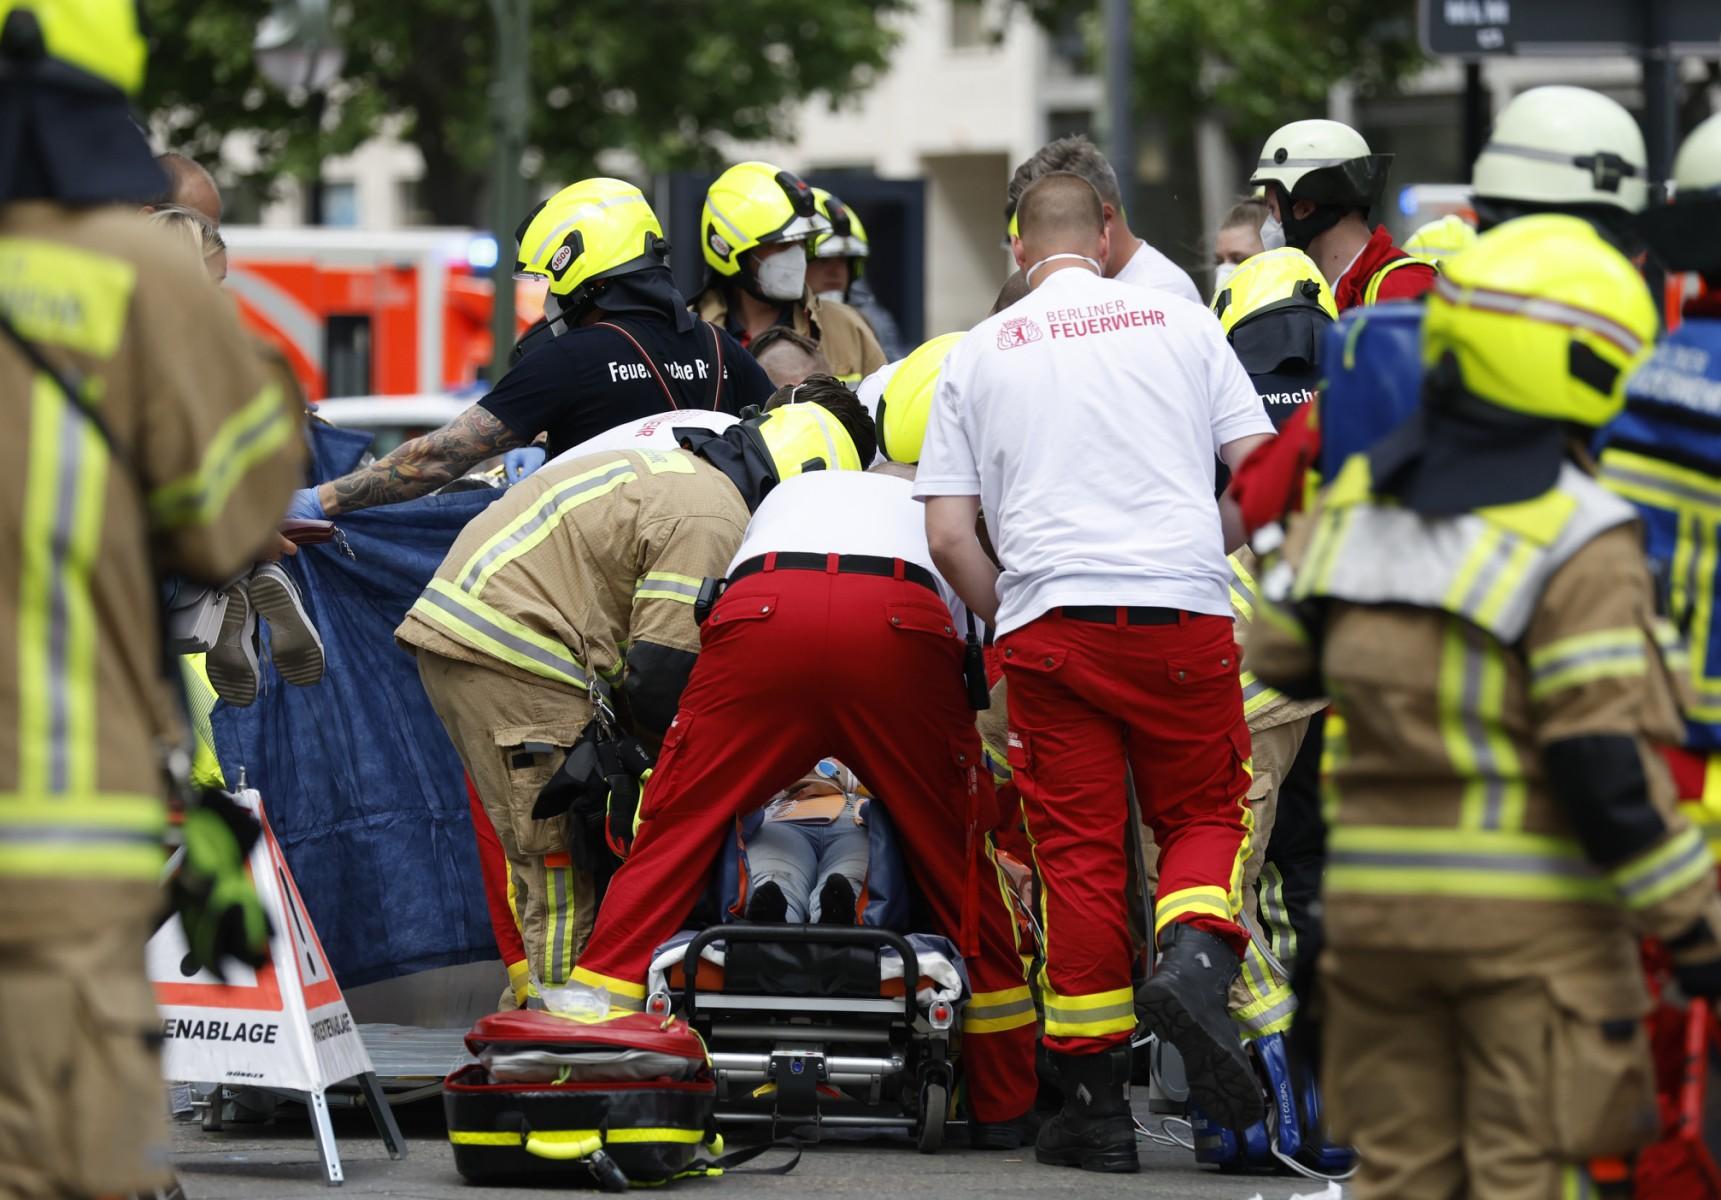 Rescue workers help an injured person at the site where one person was killed and eight injured when a car drove into a group of people in central Berlin, on June 8. Photo: AFP